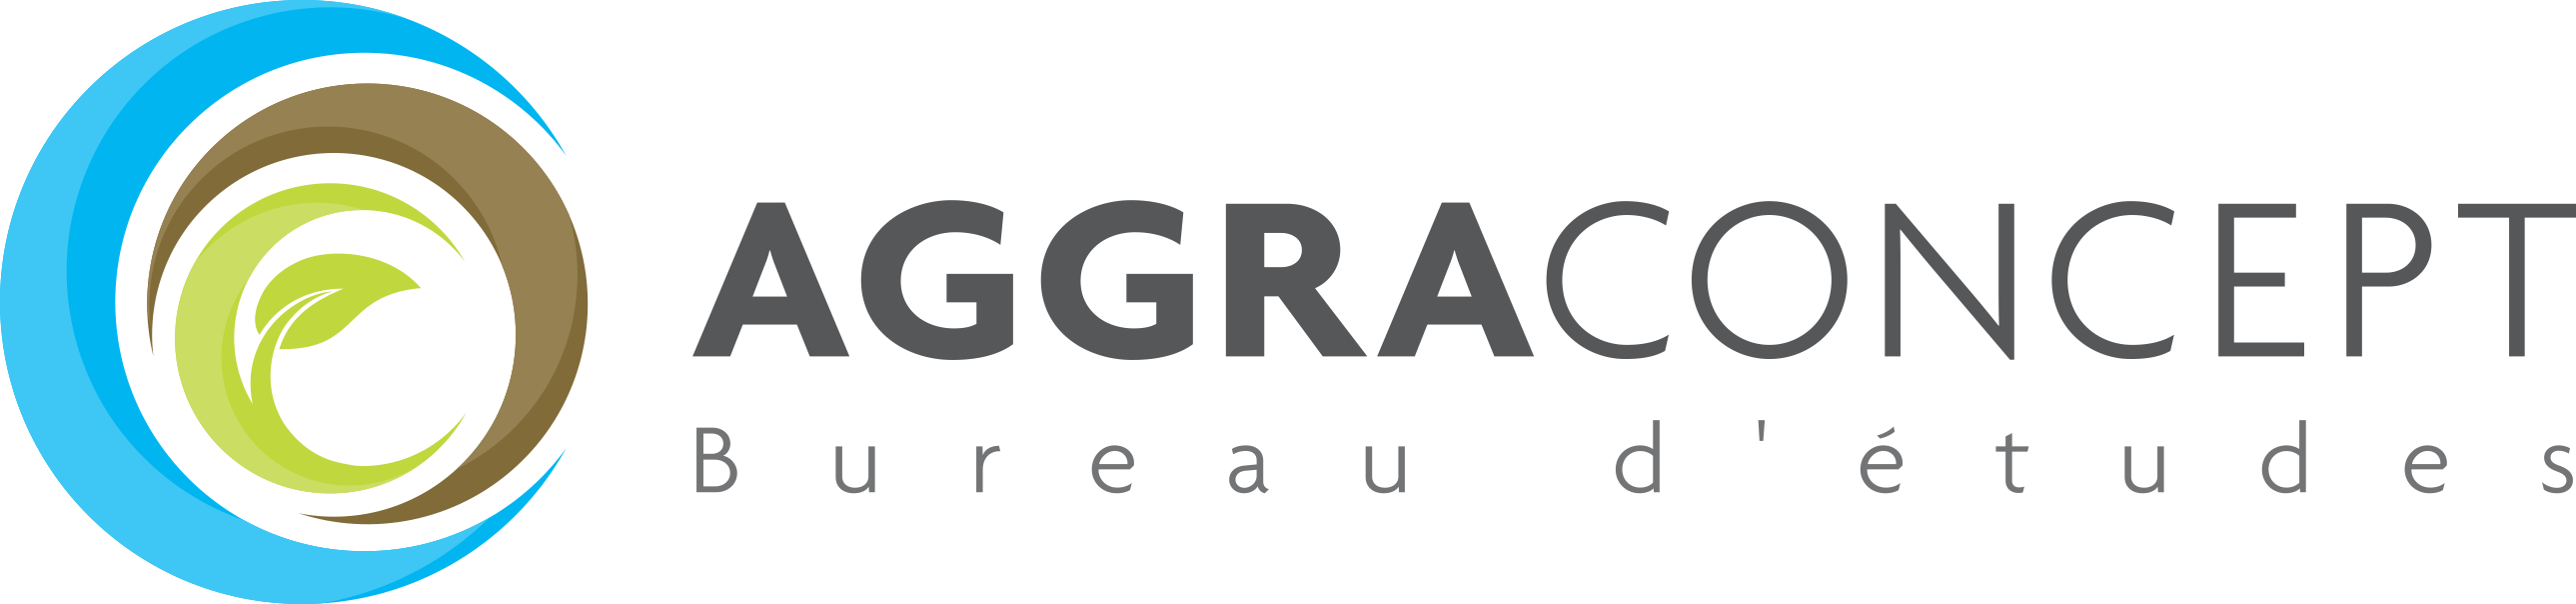 Aggraconcept